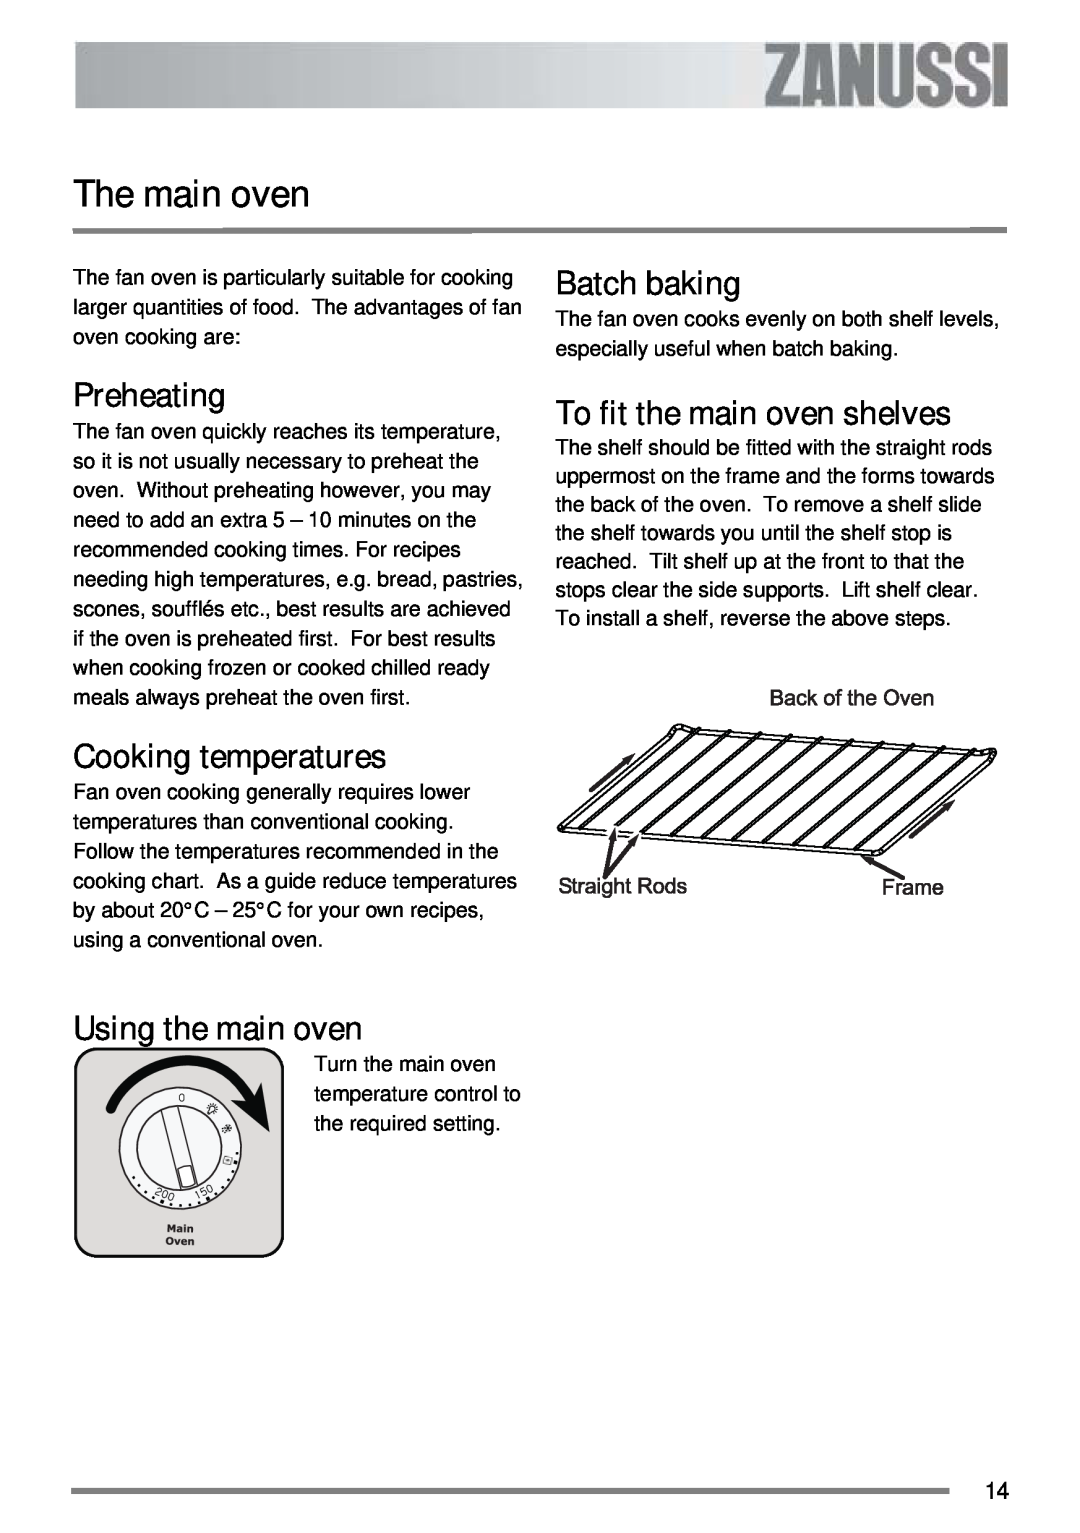 Zanussi ZKC 6000W user manual The main oven, Preheating, Cooking temperatures, Using the main oven, Batch baking 